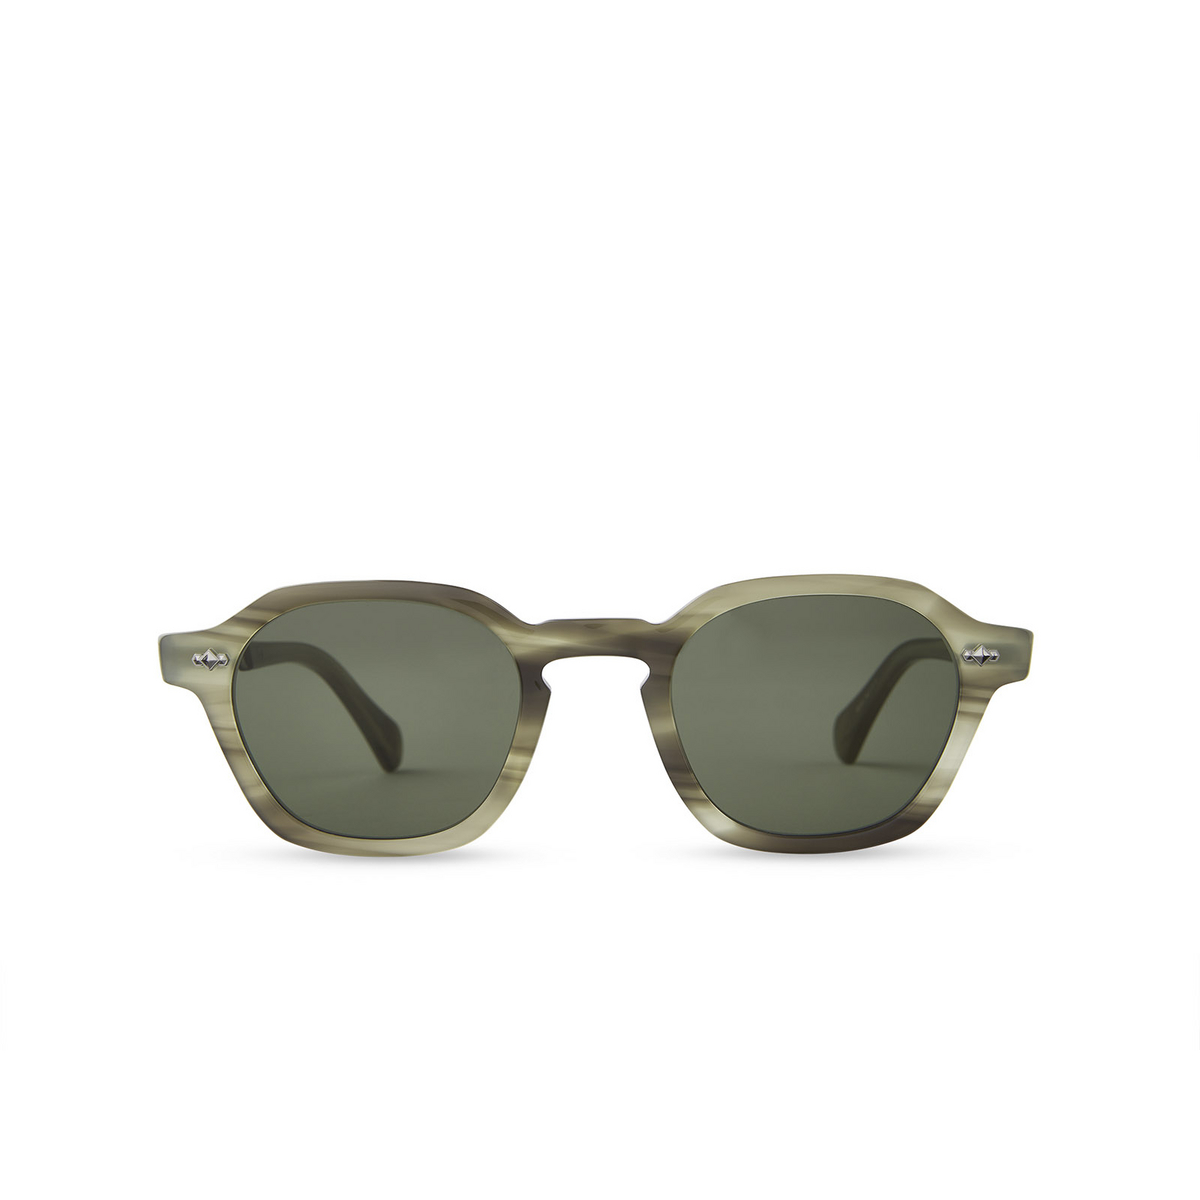 Mr. Leight RELL S Sunglasses SYC-PW/PG15 Sycamore-Pewter - front view